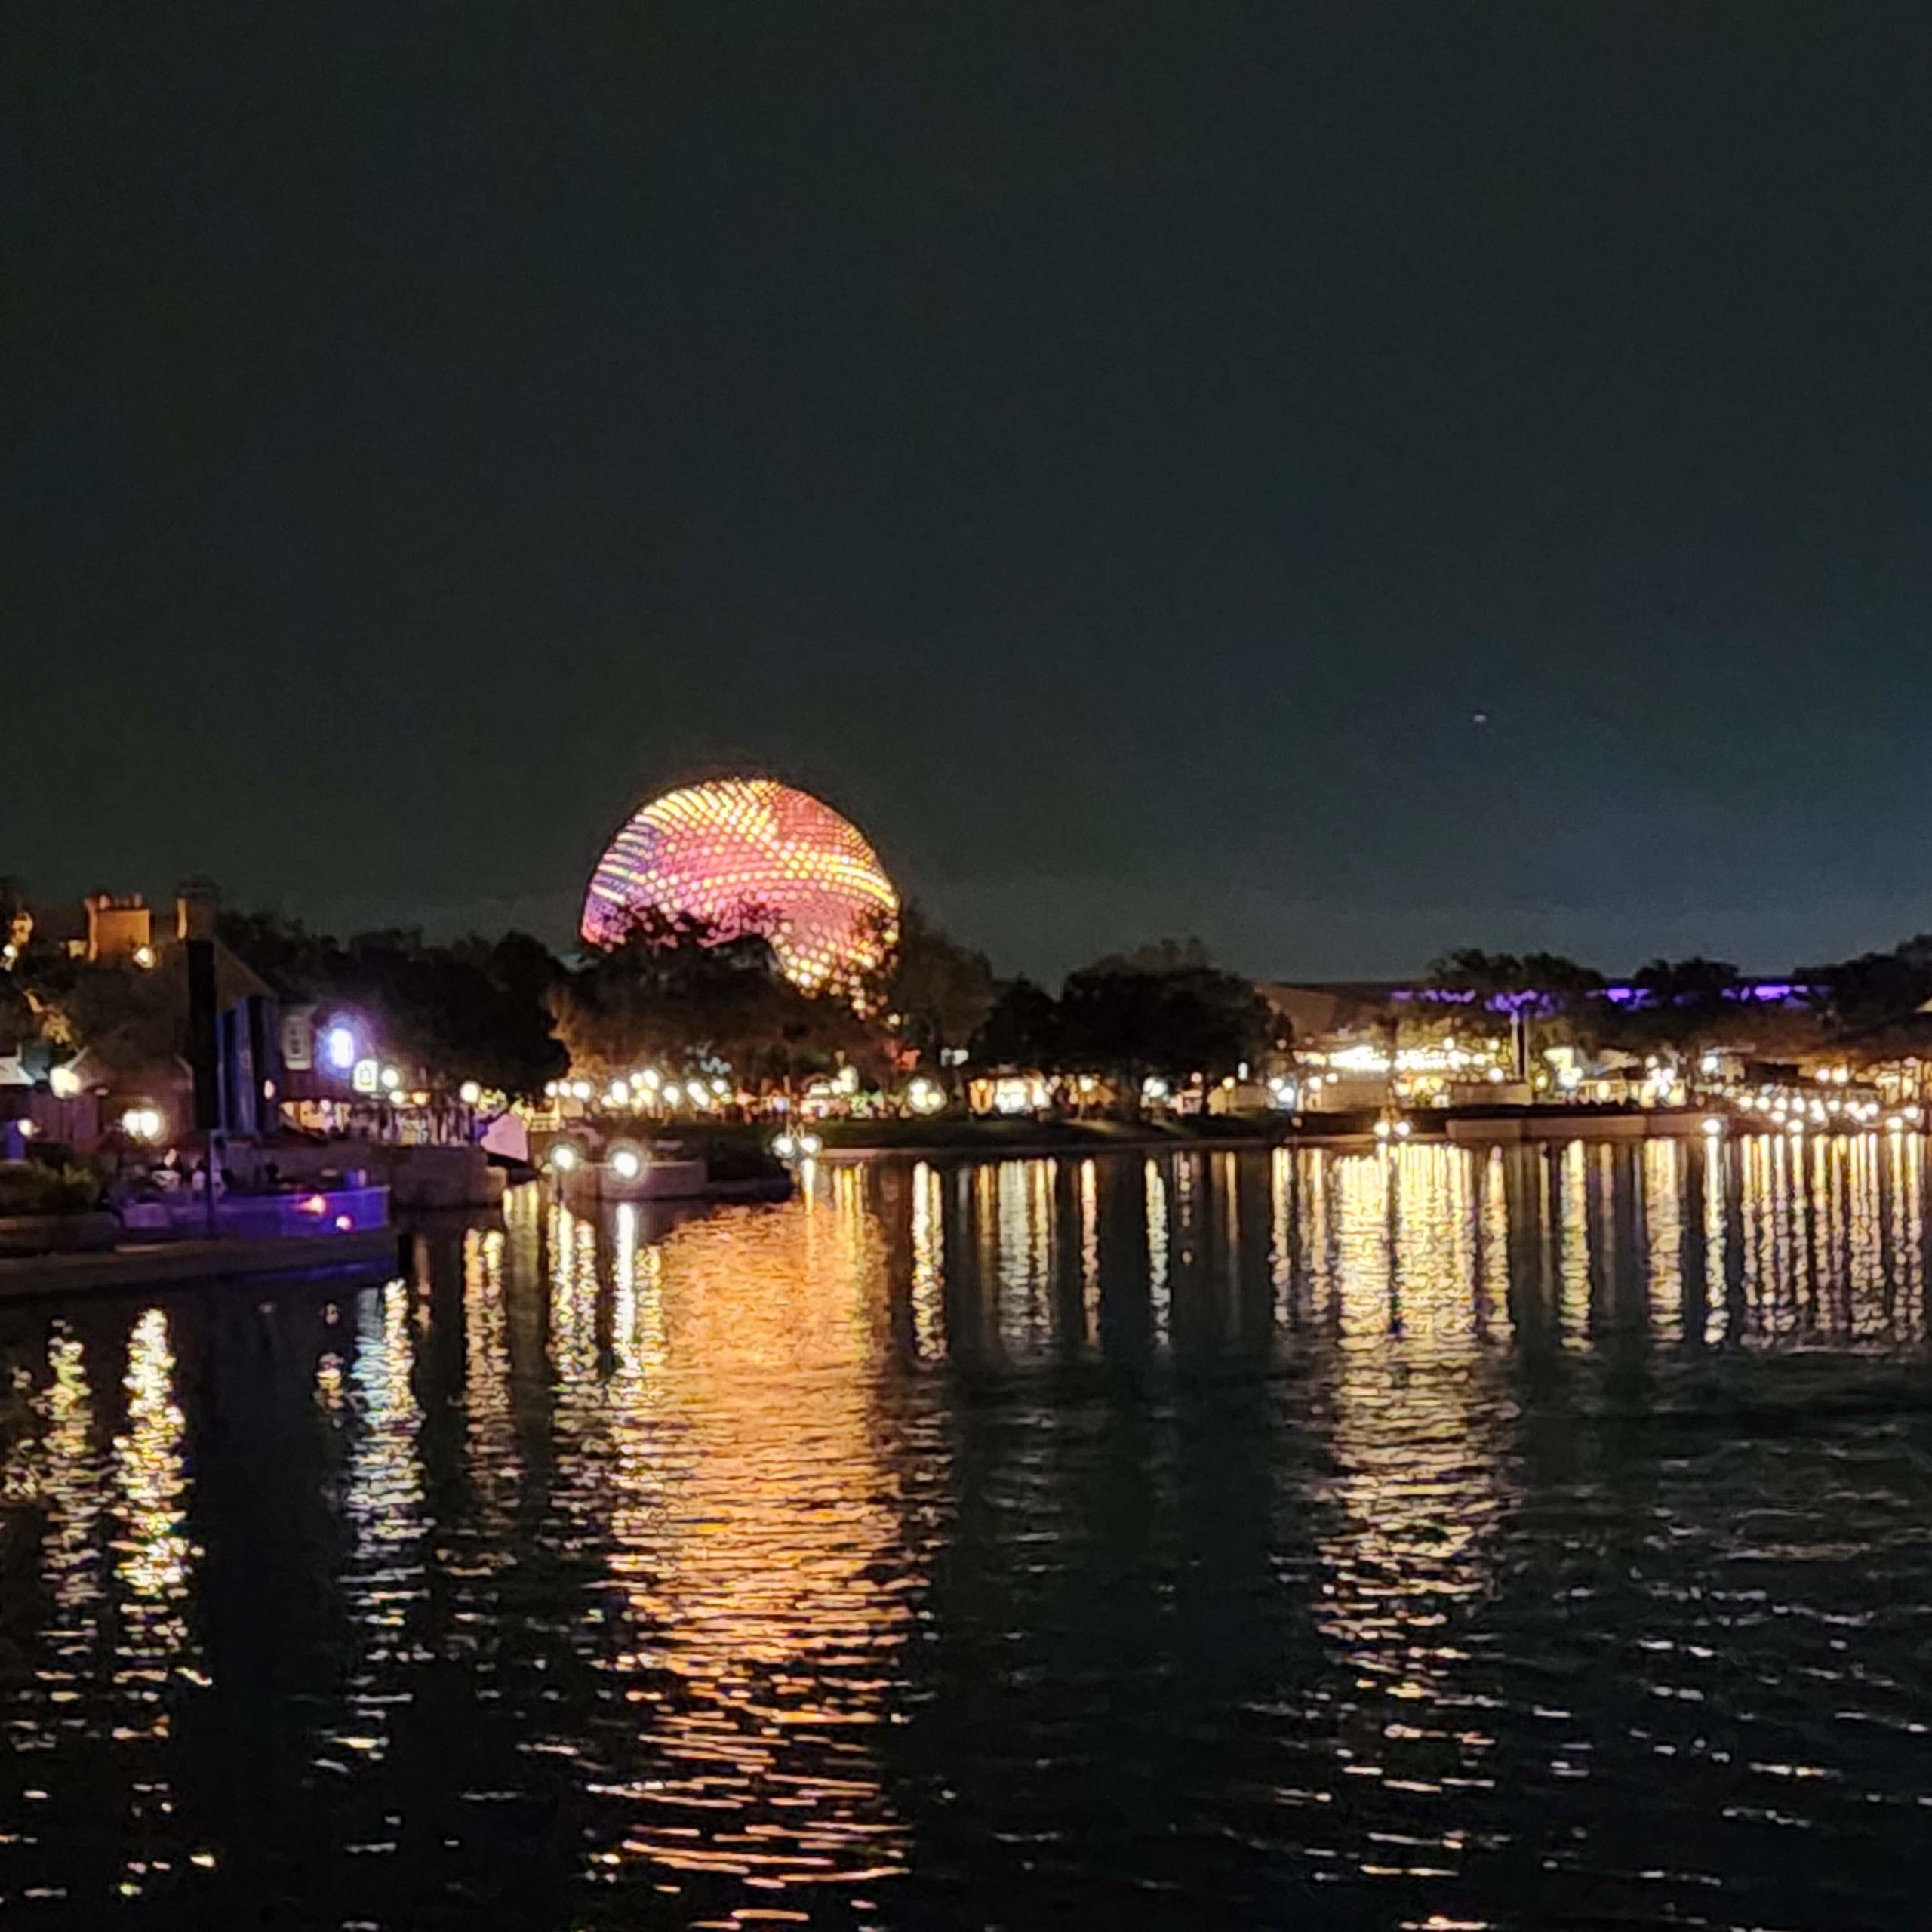 Spaceship Earth at Night from across the lagoon